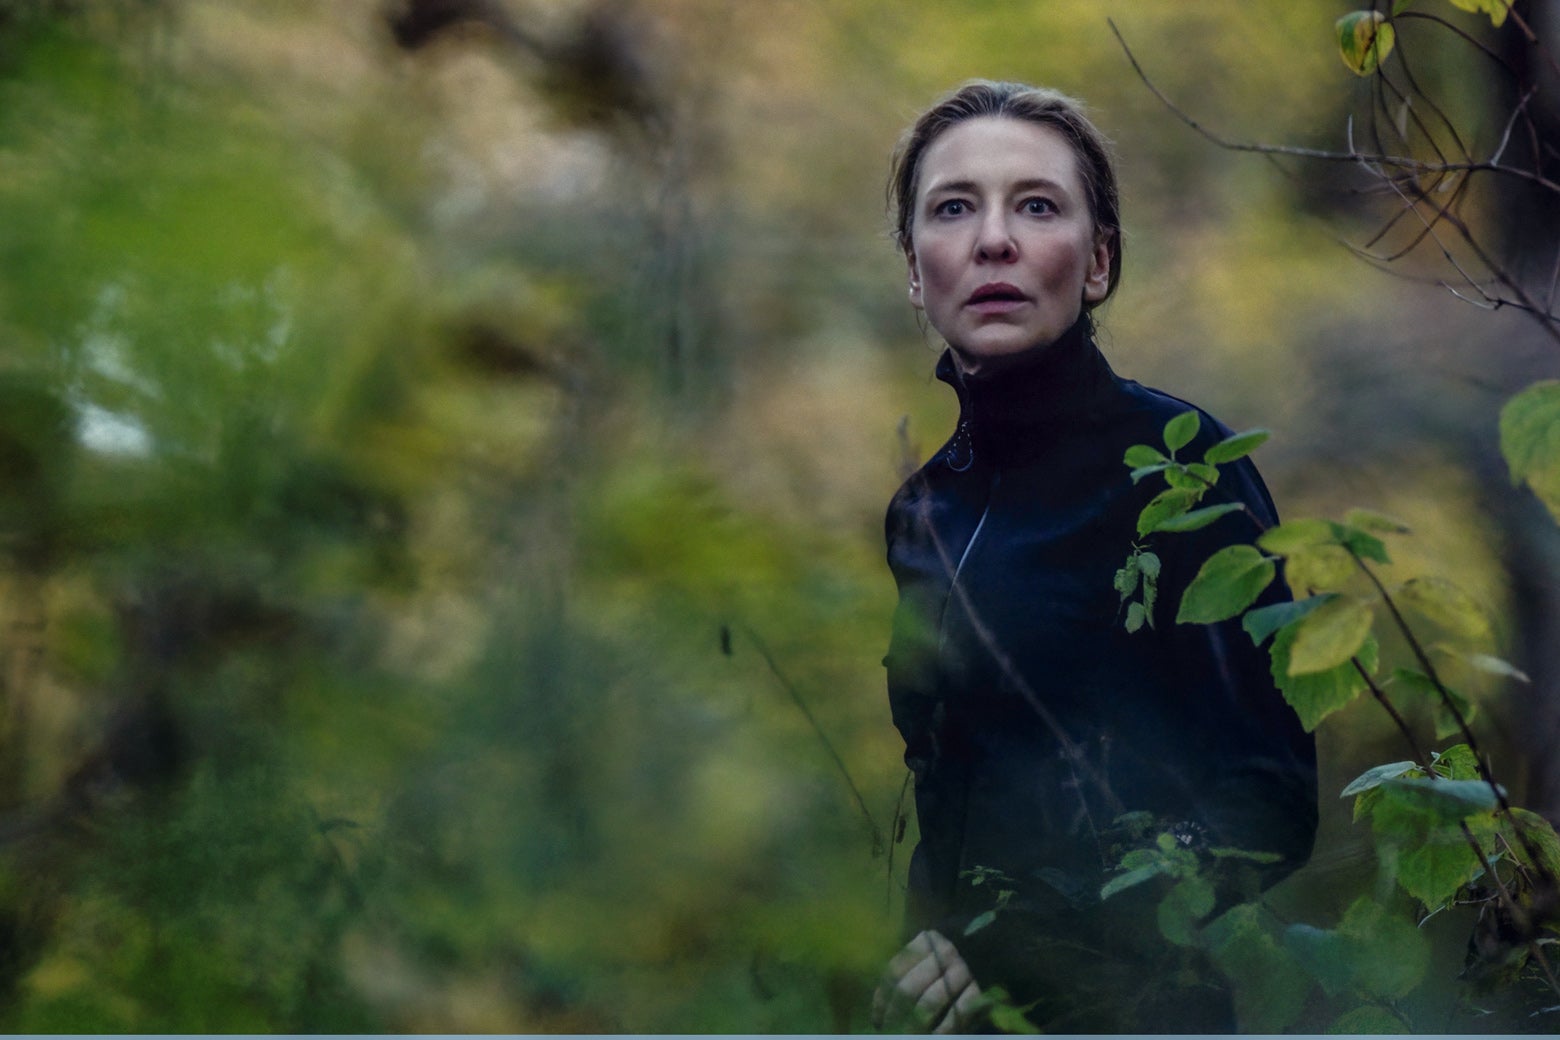 Lydia, wearing a black turtleneck, stares ahead in fear in the woods.